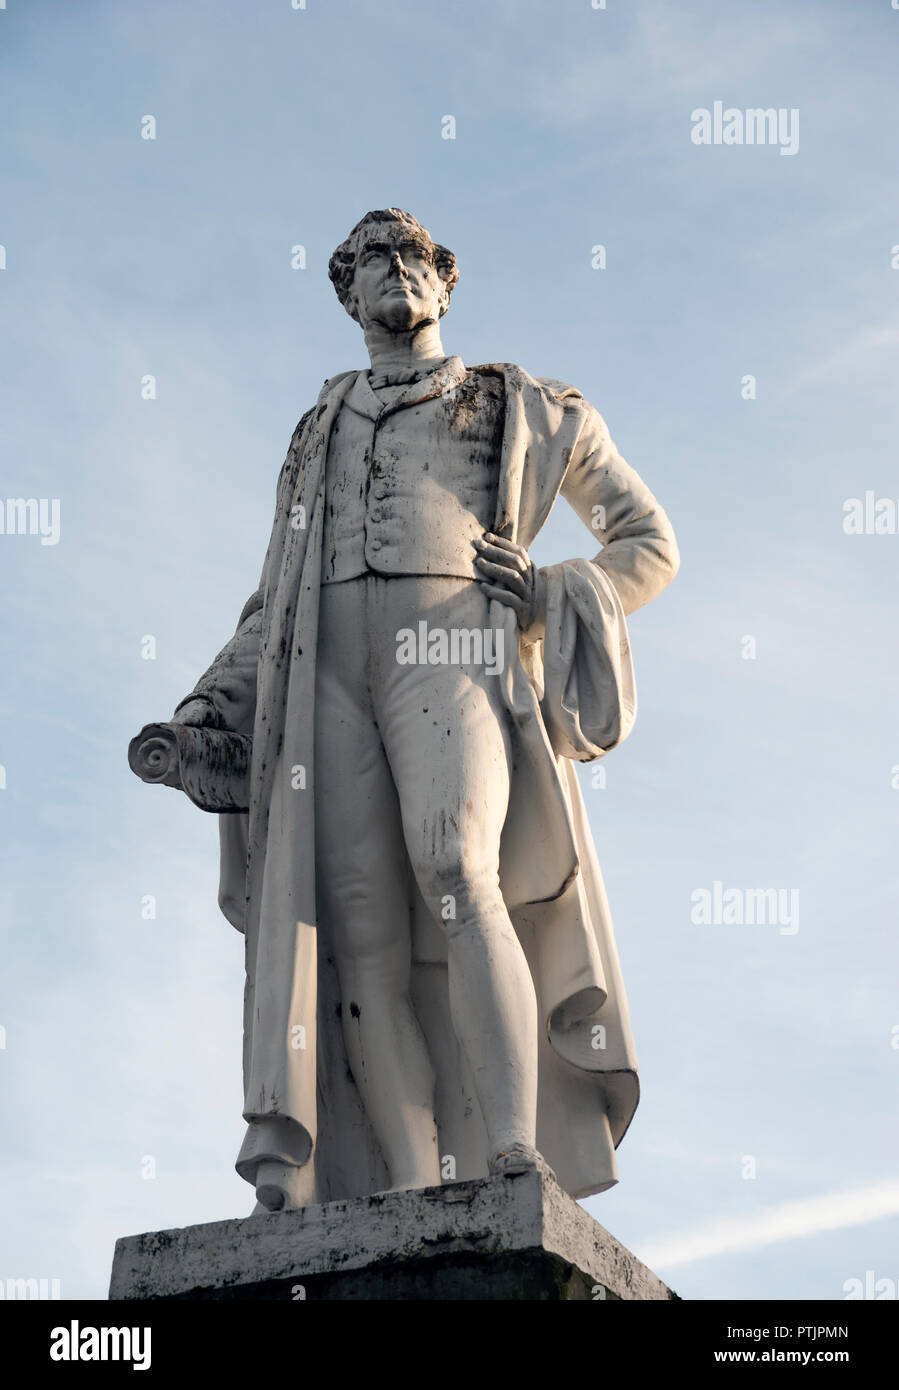 Statue of Sir Robert Peel, previous Prime Minister and founder of the Metrolitan Police force. Stock Photo